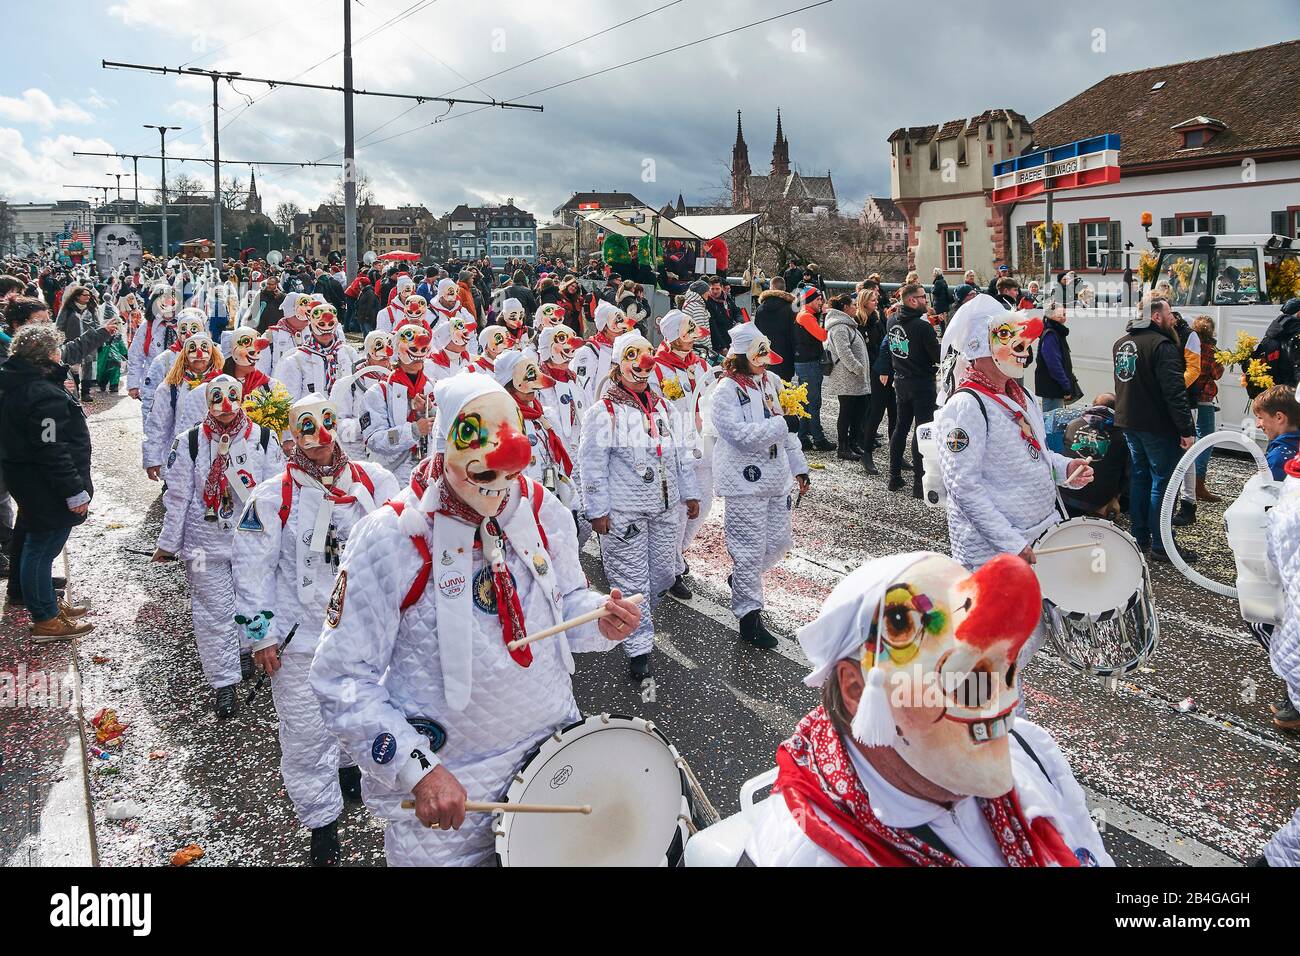 Europe, Switzerland, Basel, Traditional event, Basel Fasnacht, the largest in Switzerland, intangible cultural heritage of humanity, Cortège on the Wettstein Bridge, Guggenmusik, Basel Minster in the background Stock Photo